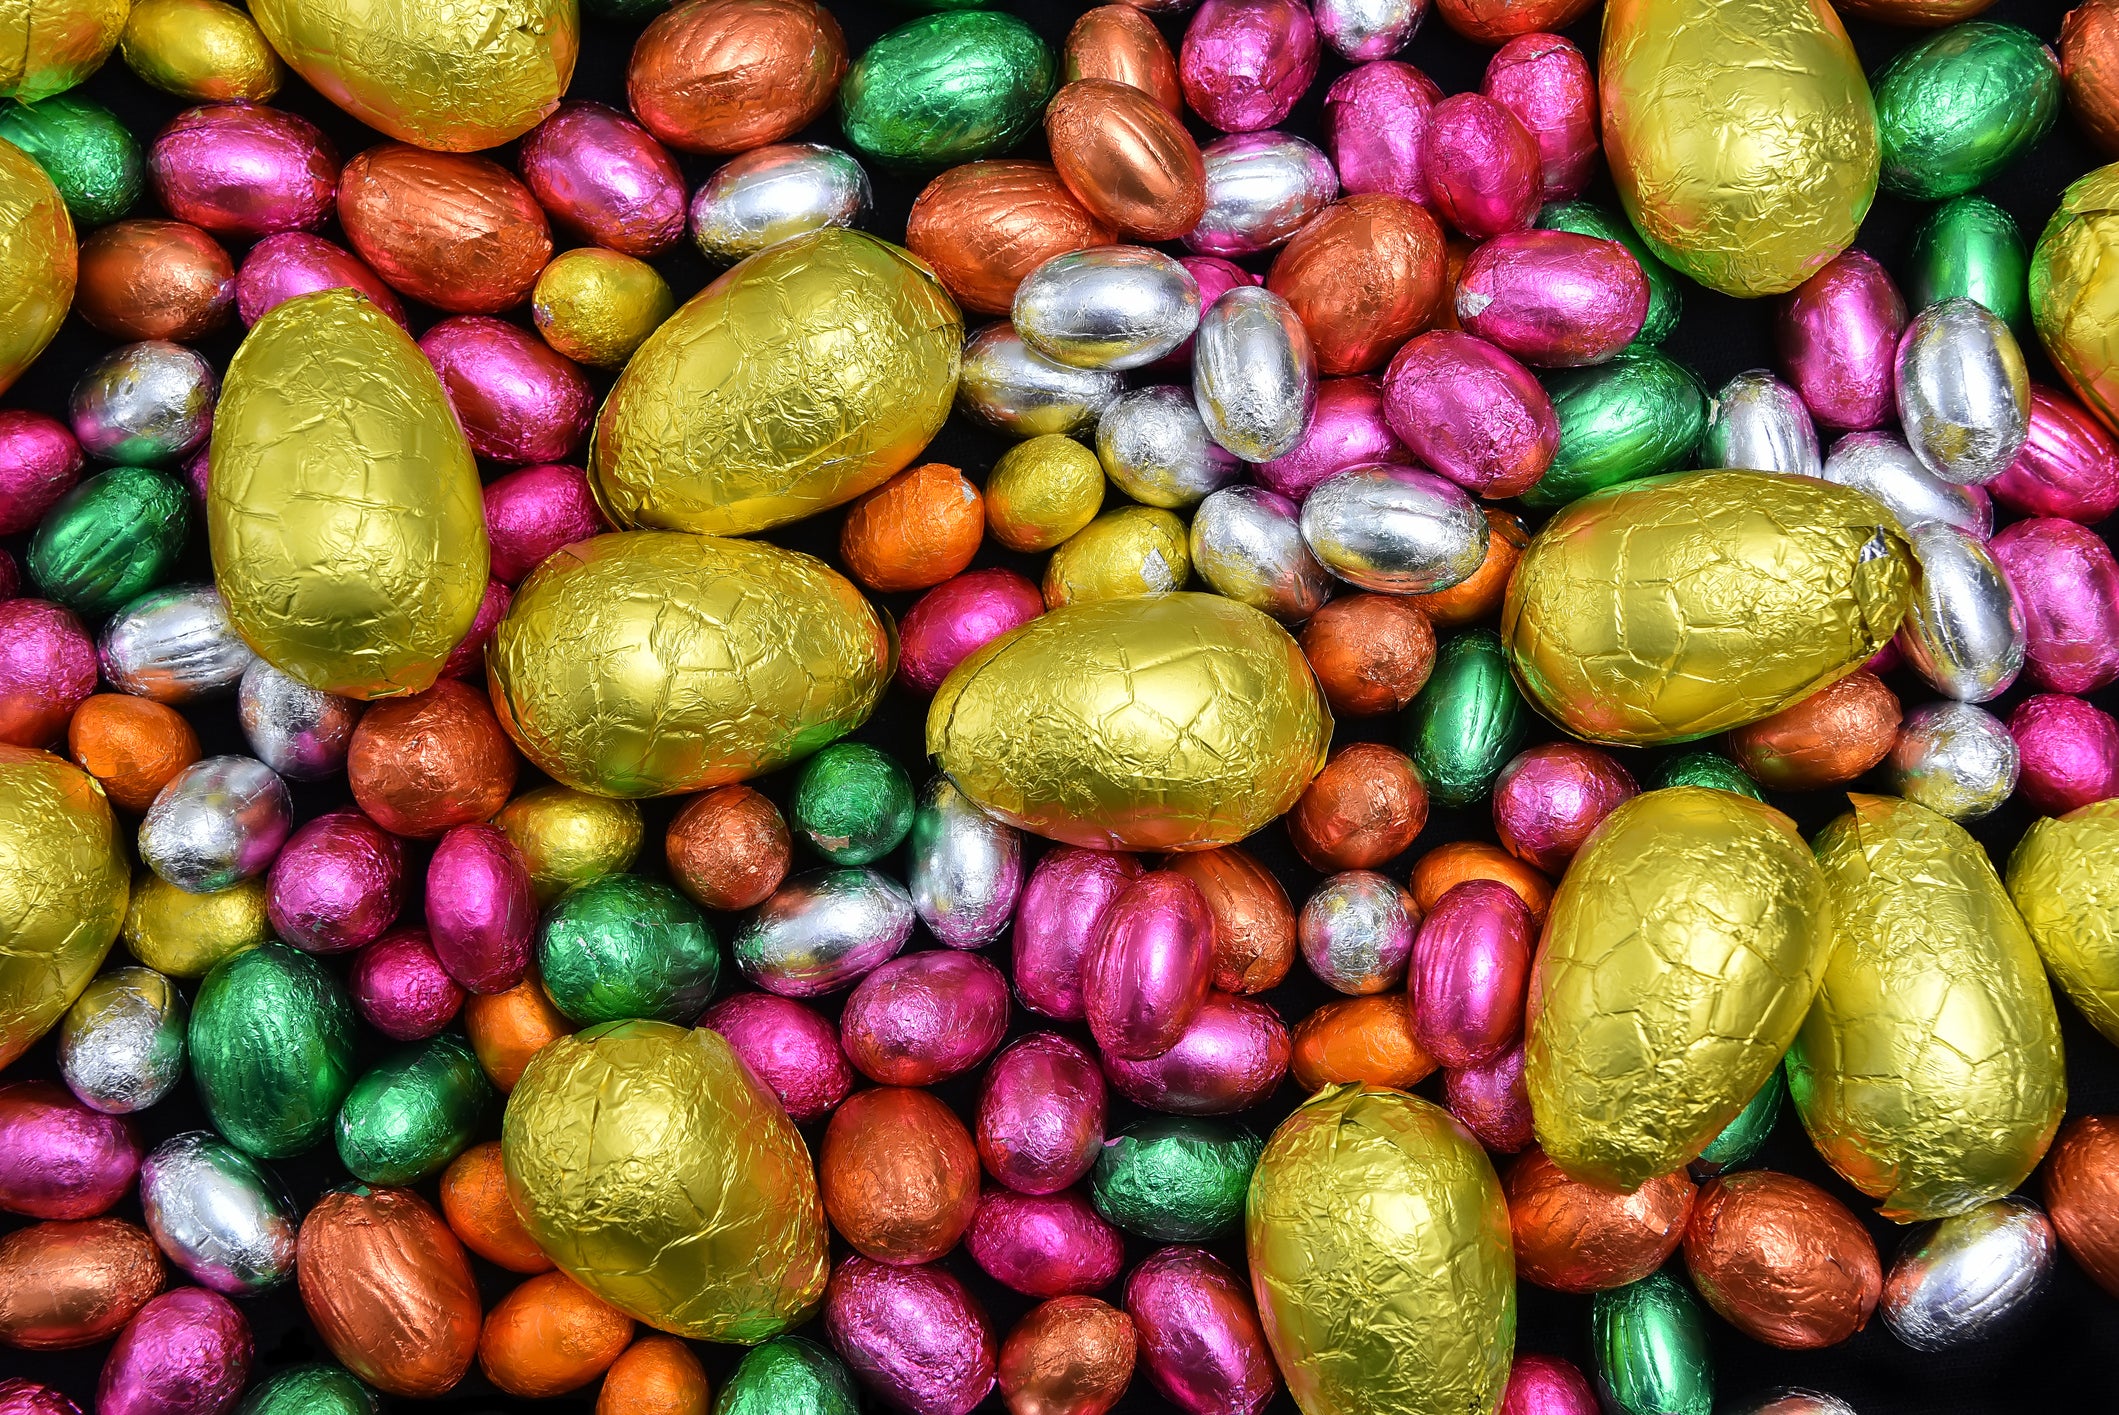 Households often have more sweet treats than usual over the Easter weekend